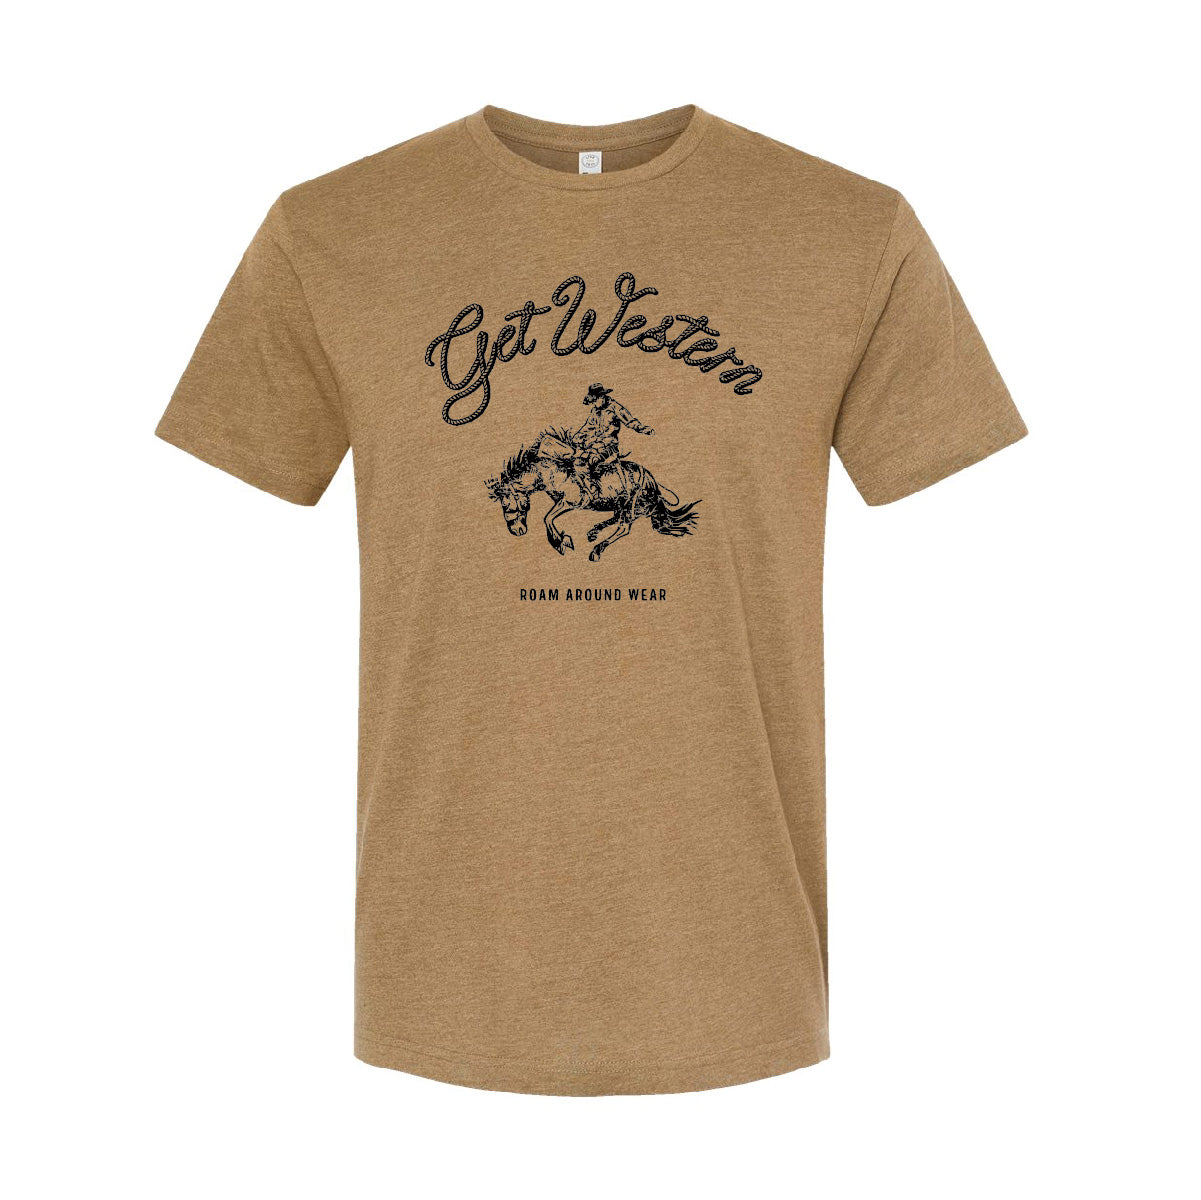 Get Western Wyoming Print. Bucking horse and cowboy in black with Get Western rope text. Wyoming Tee. Rodeo Tee. Roam Around Wear is a Wyoming t-shirt company based out of Gillette, Wyoming